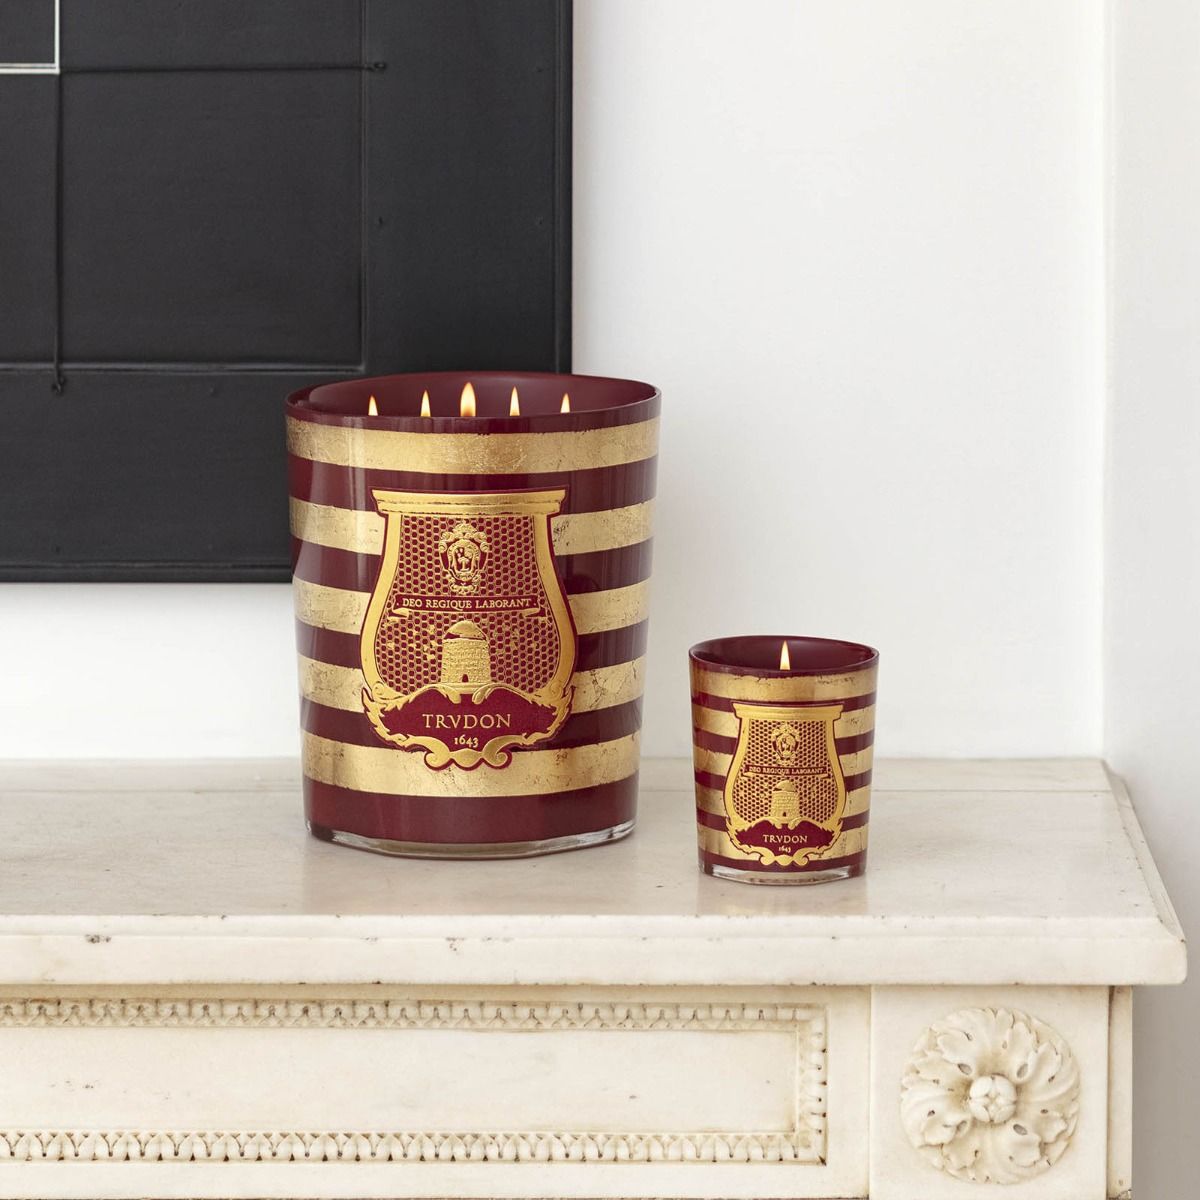 BALMAIN CLASSIC CANDLE - RED EDITION 270G - TRUDON